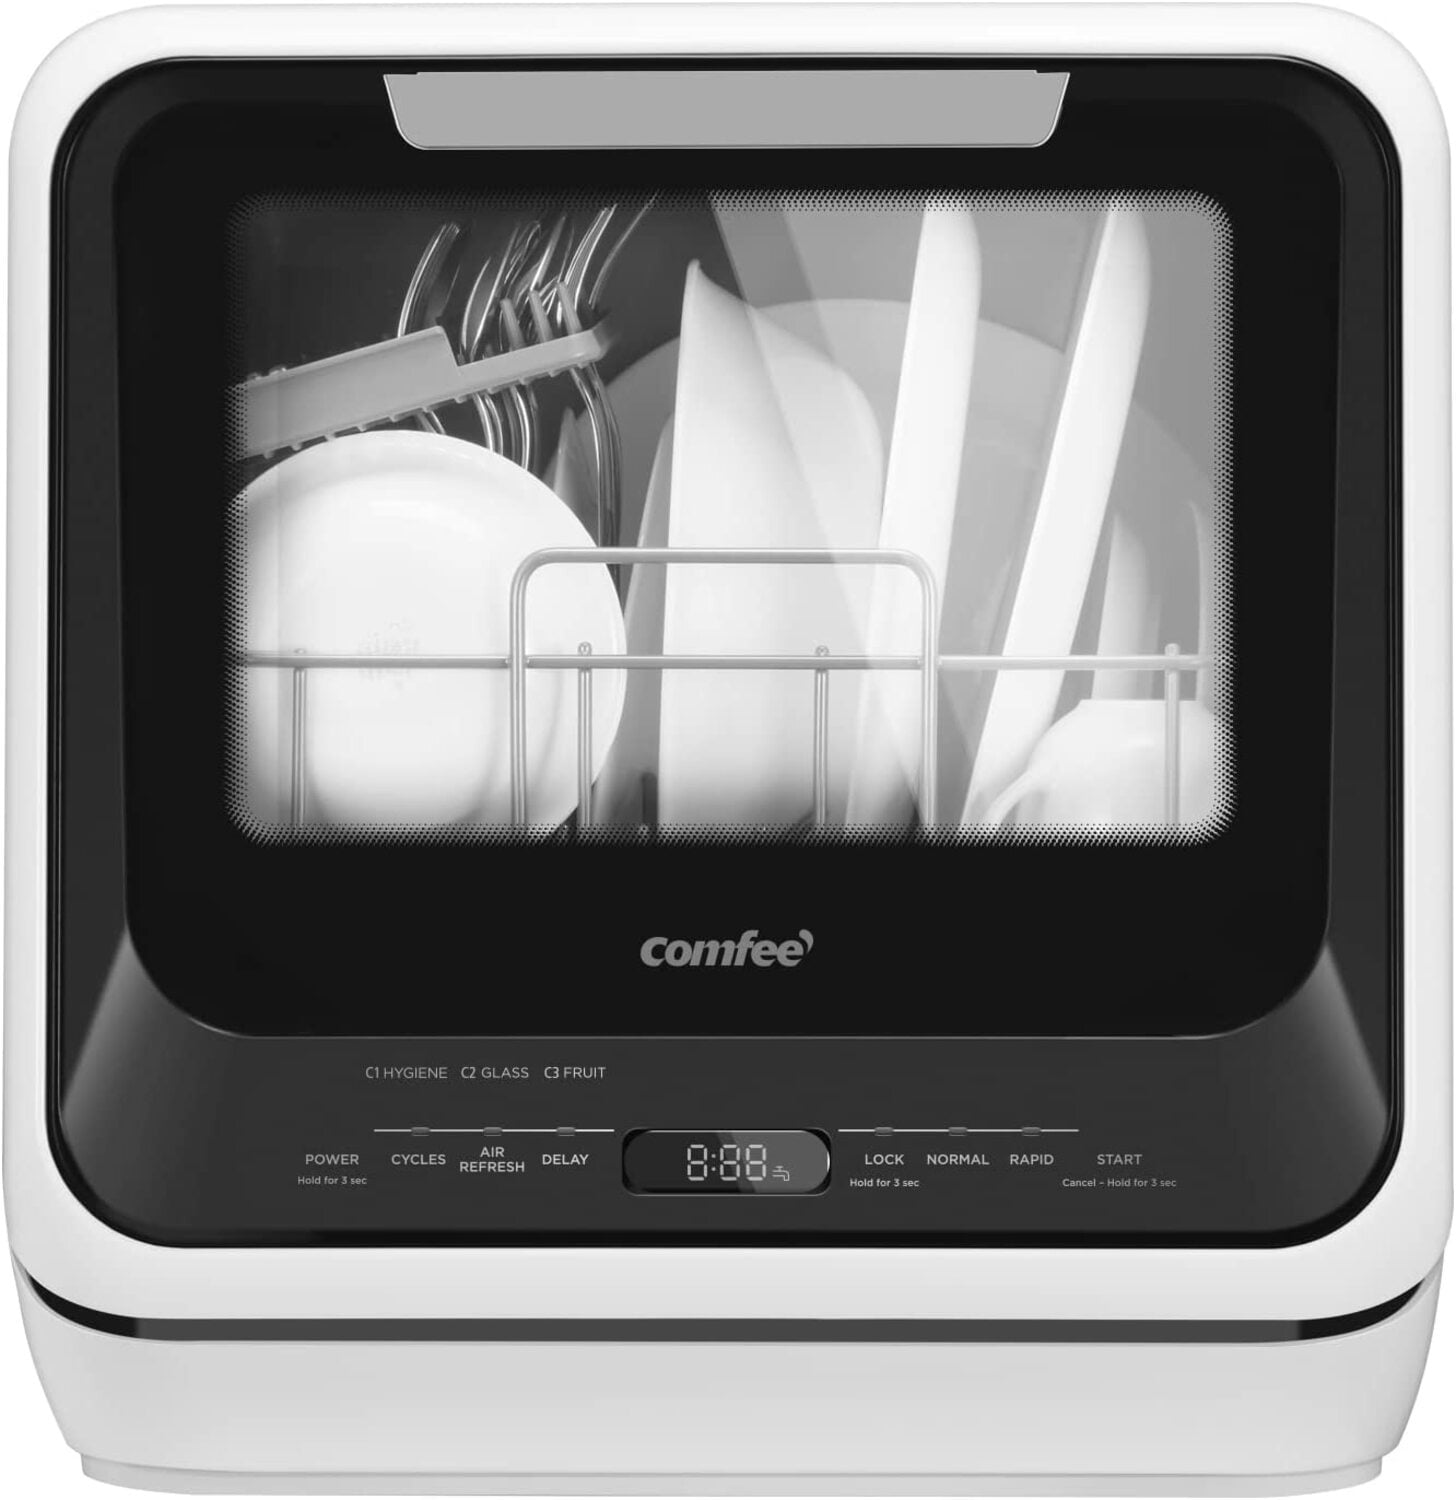 No Hookup Needed Portable Countertop Dishwasher, With 5-Liter